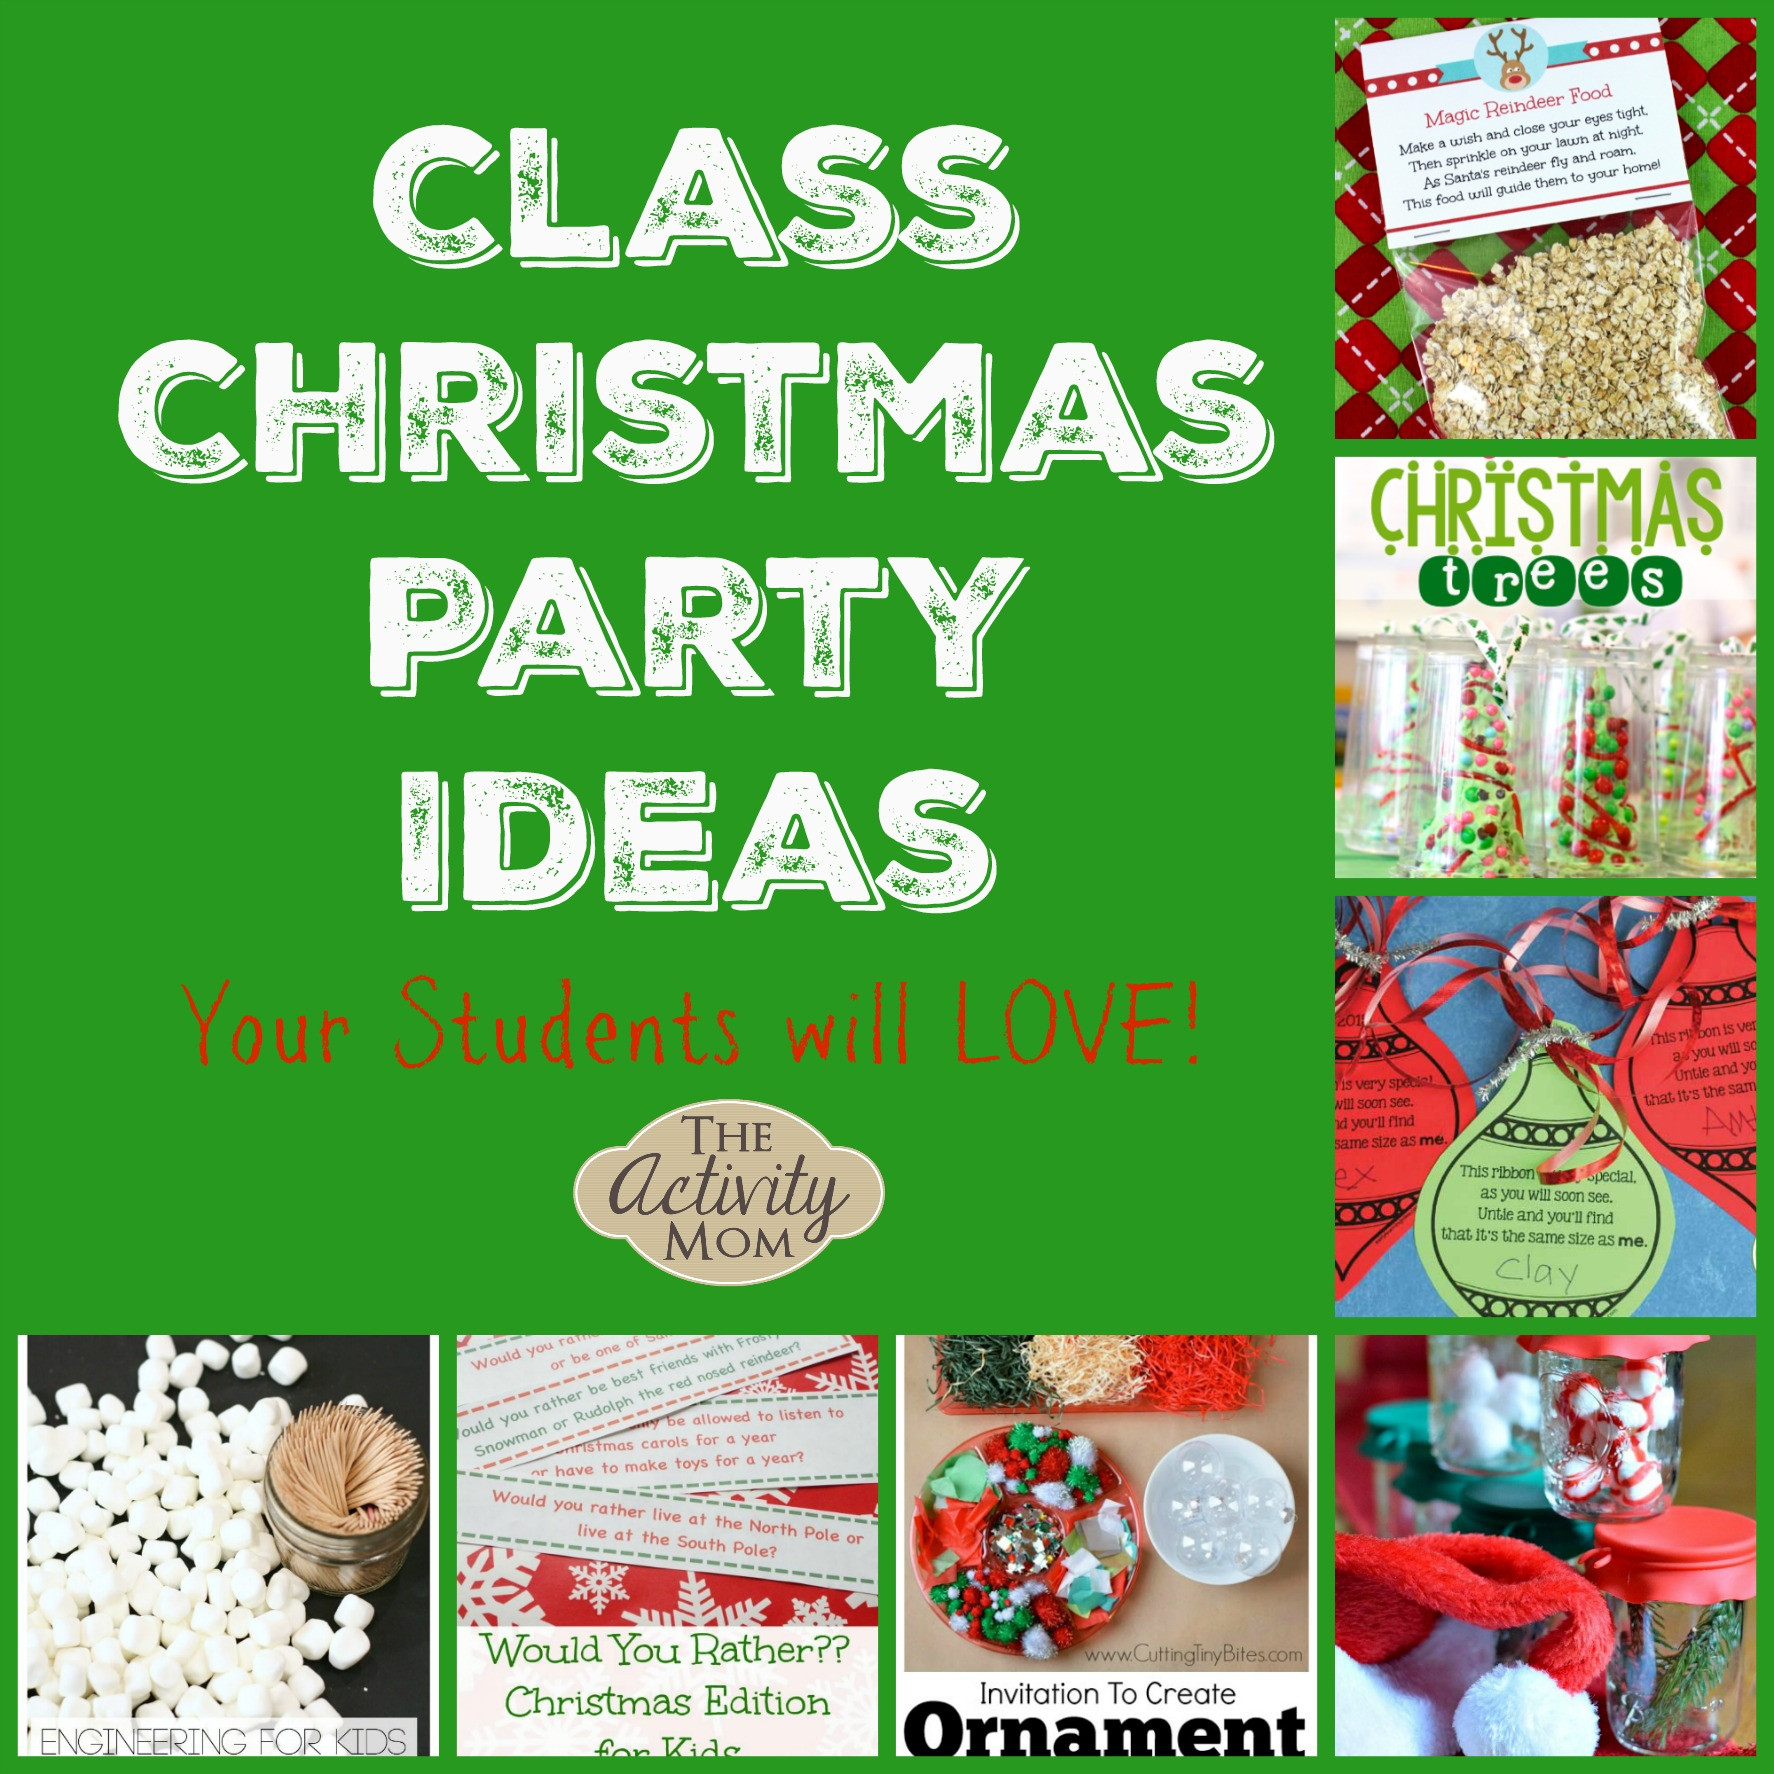 Class Christmas Party Ideas
 The Activity Mom Sharing Activities and Ideas that Make